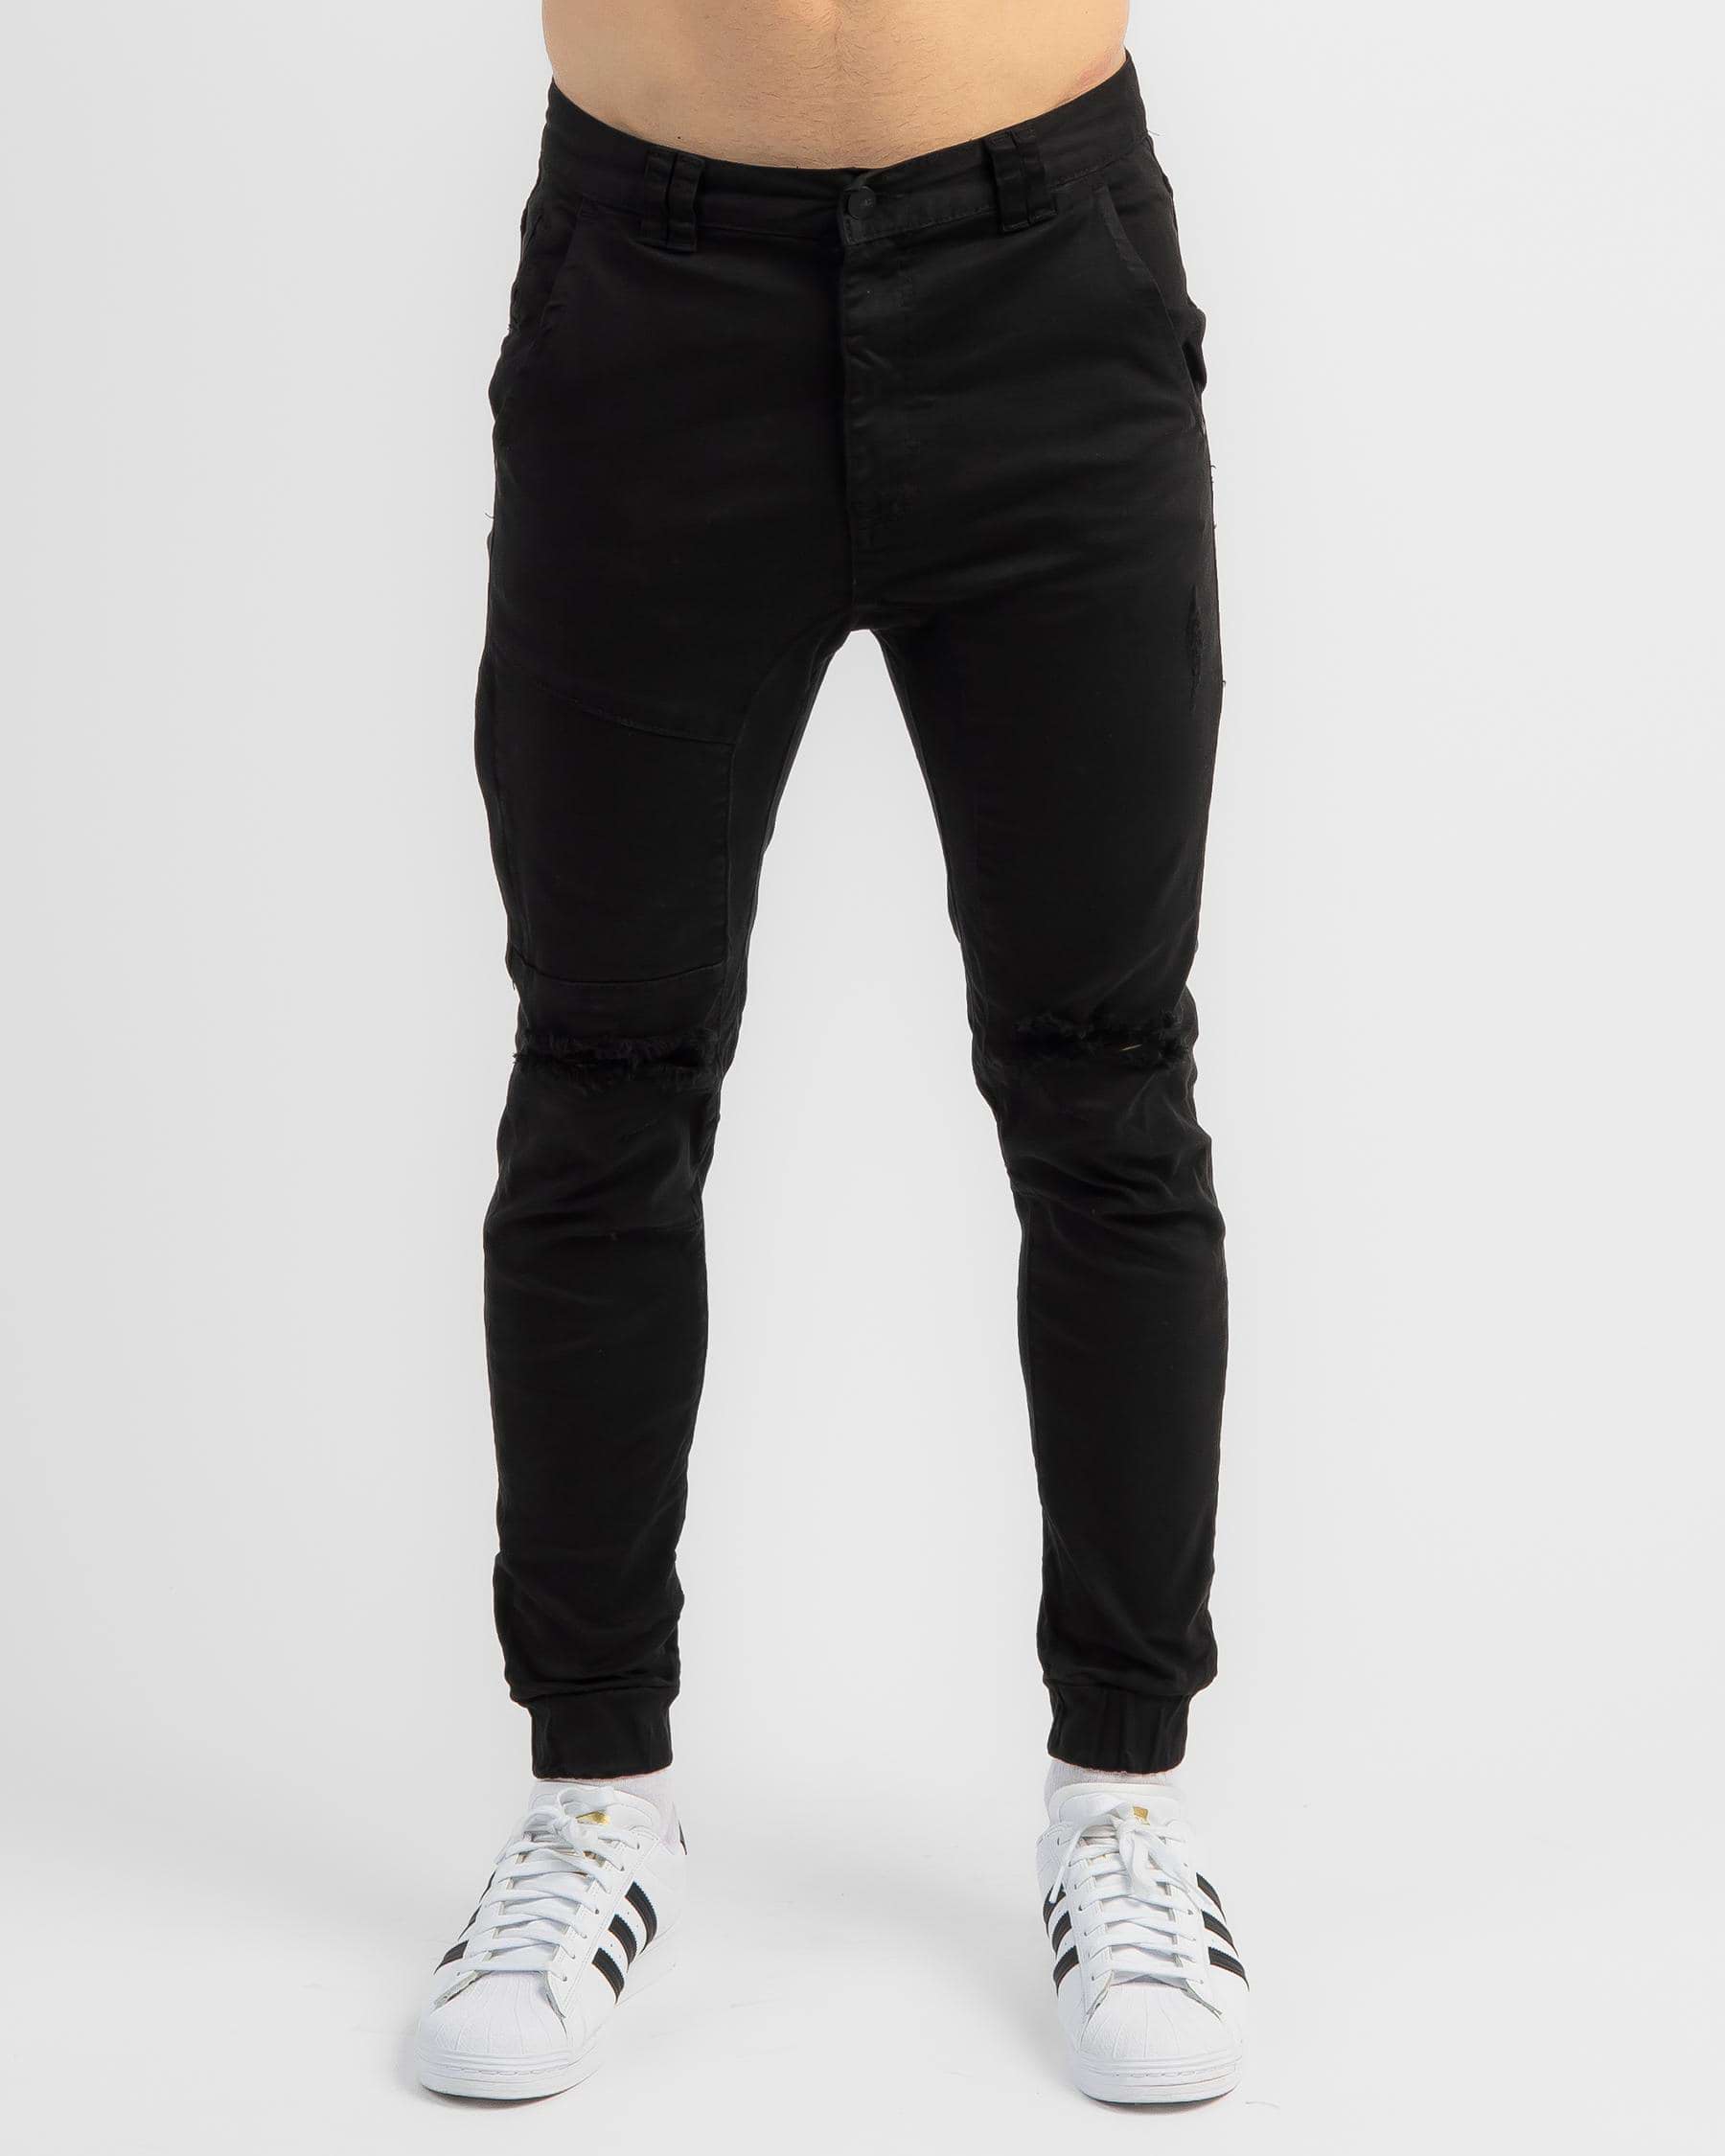 Kiss Chacey Spartan Denim Jogger Pants In Jet Black - Fast Shipping ...